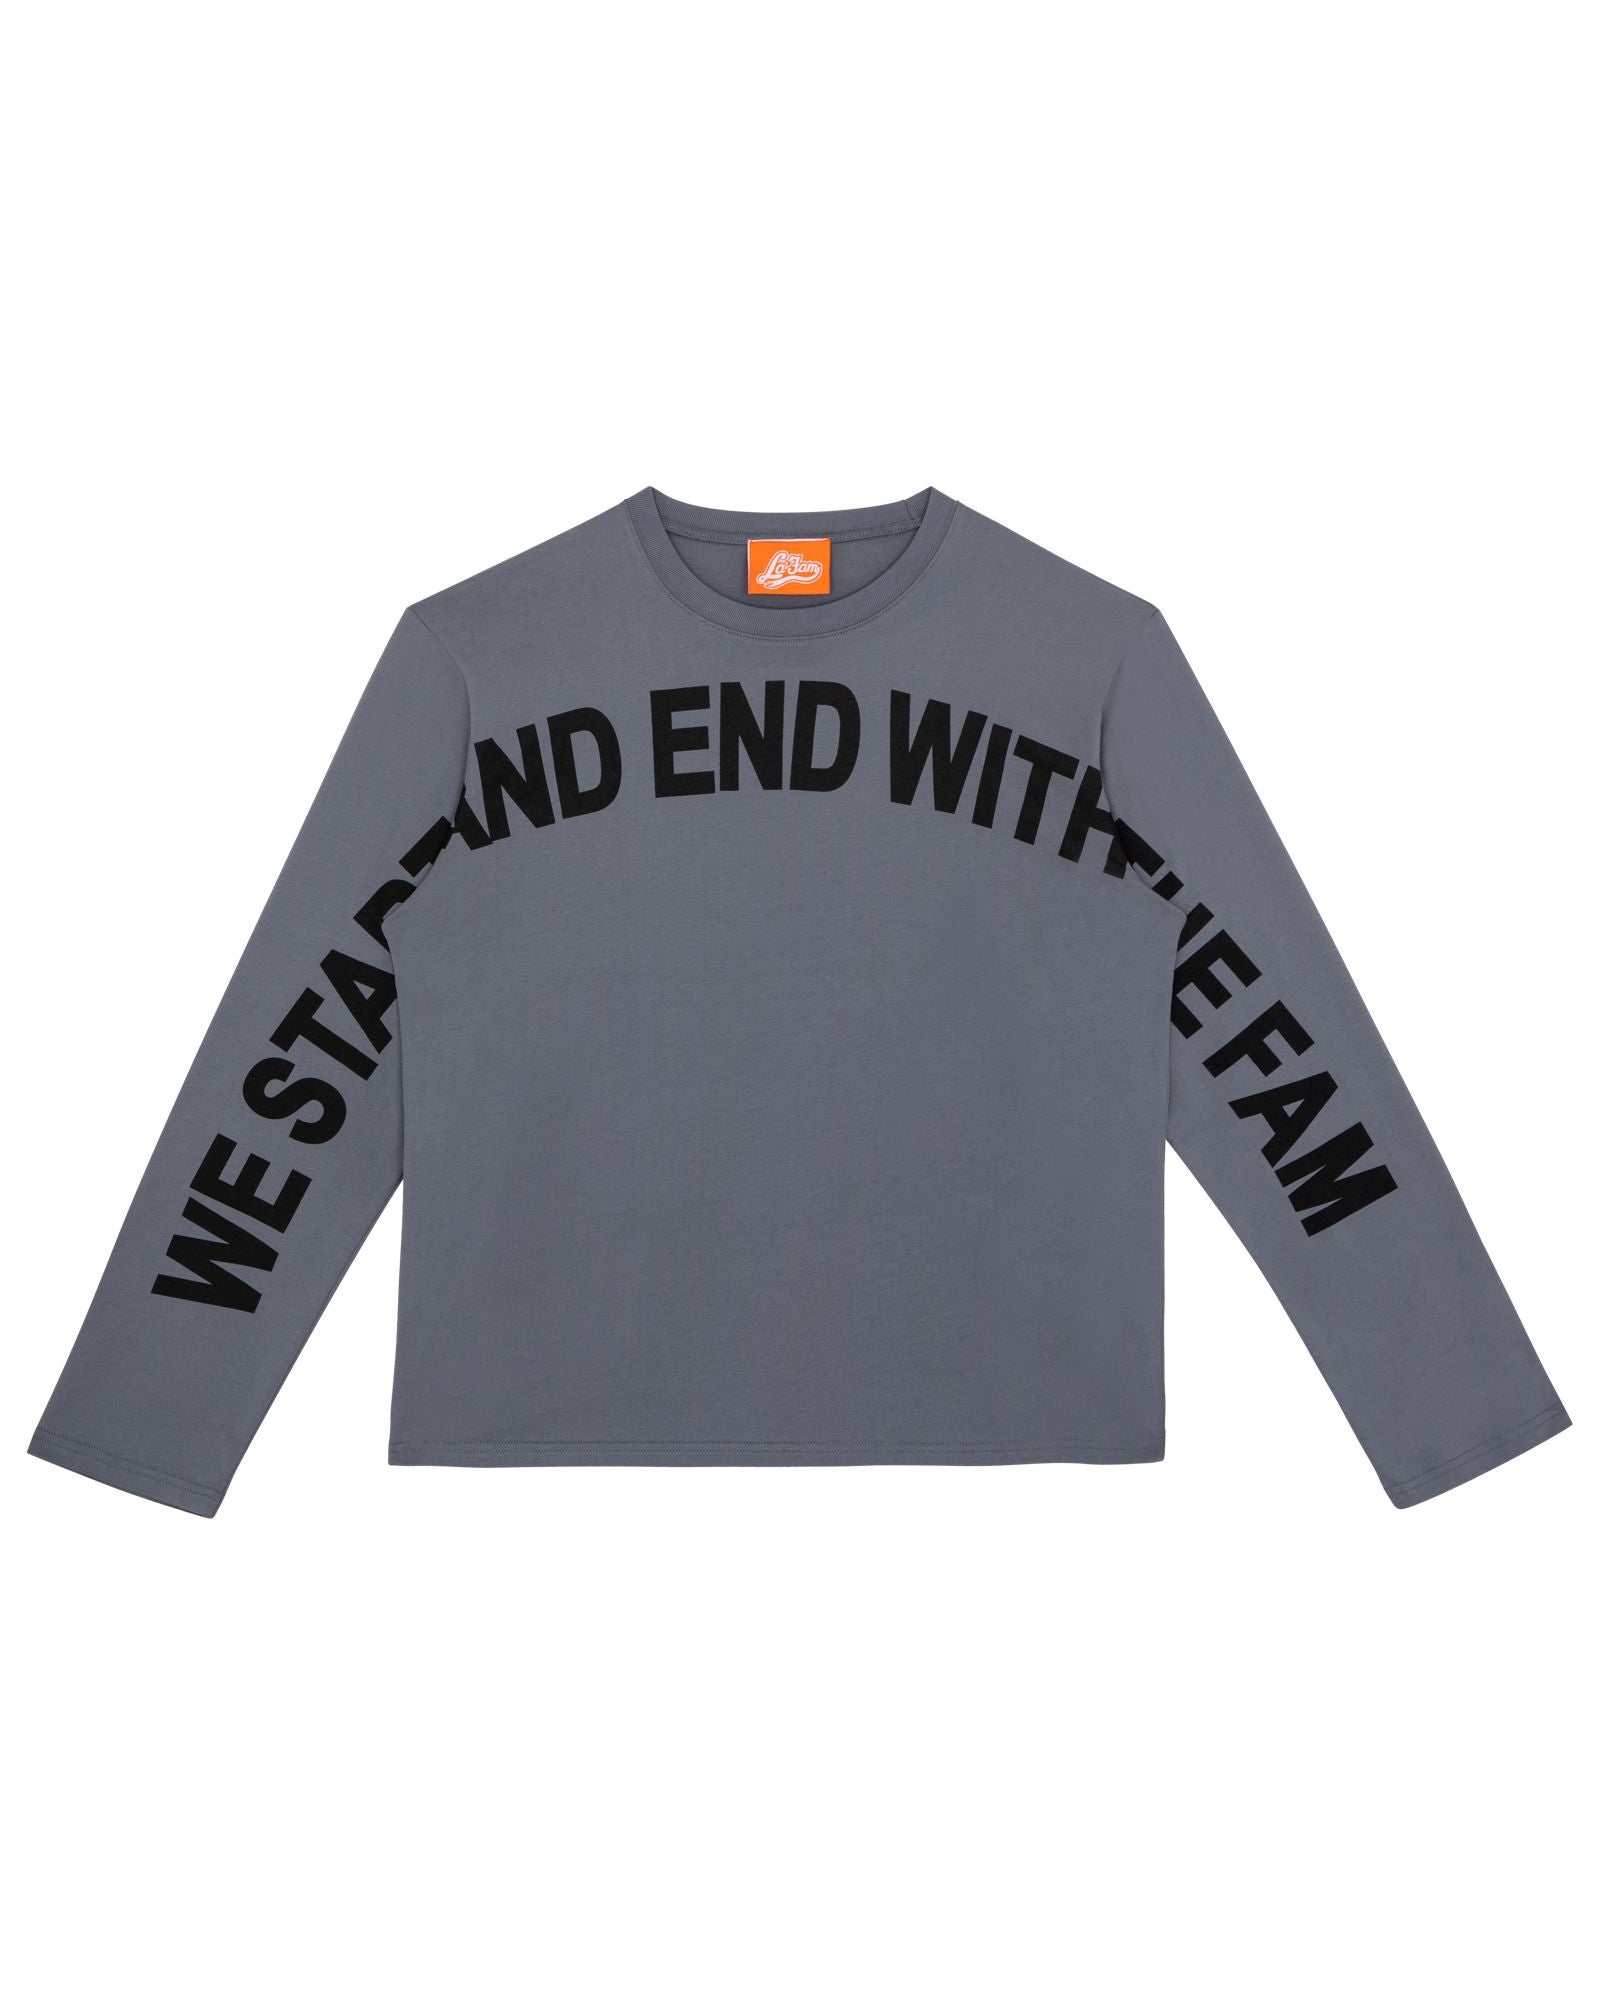 we start and end with the fam long sleeve grey